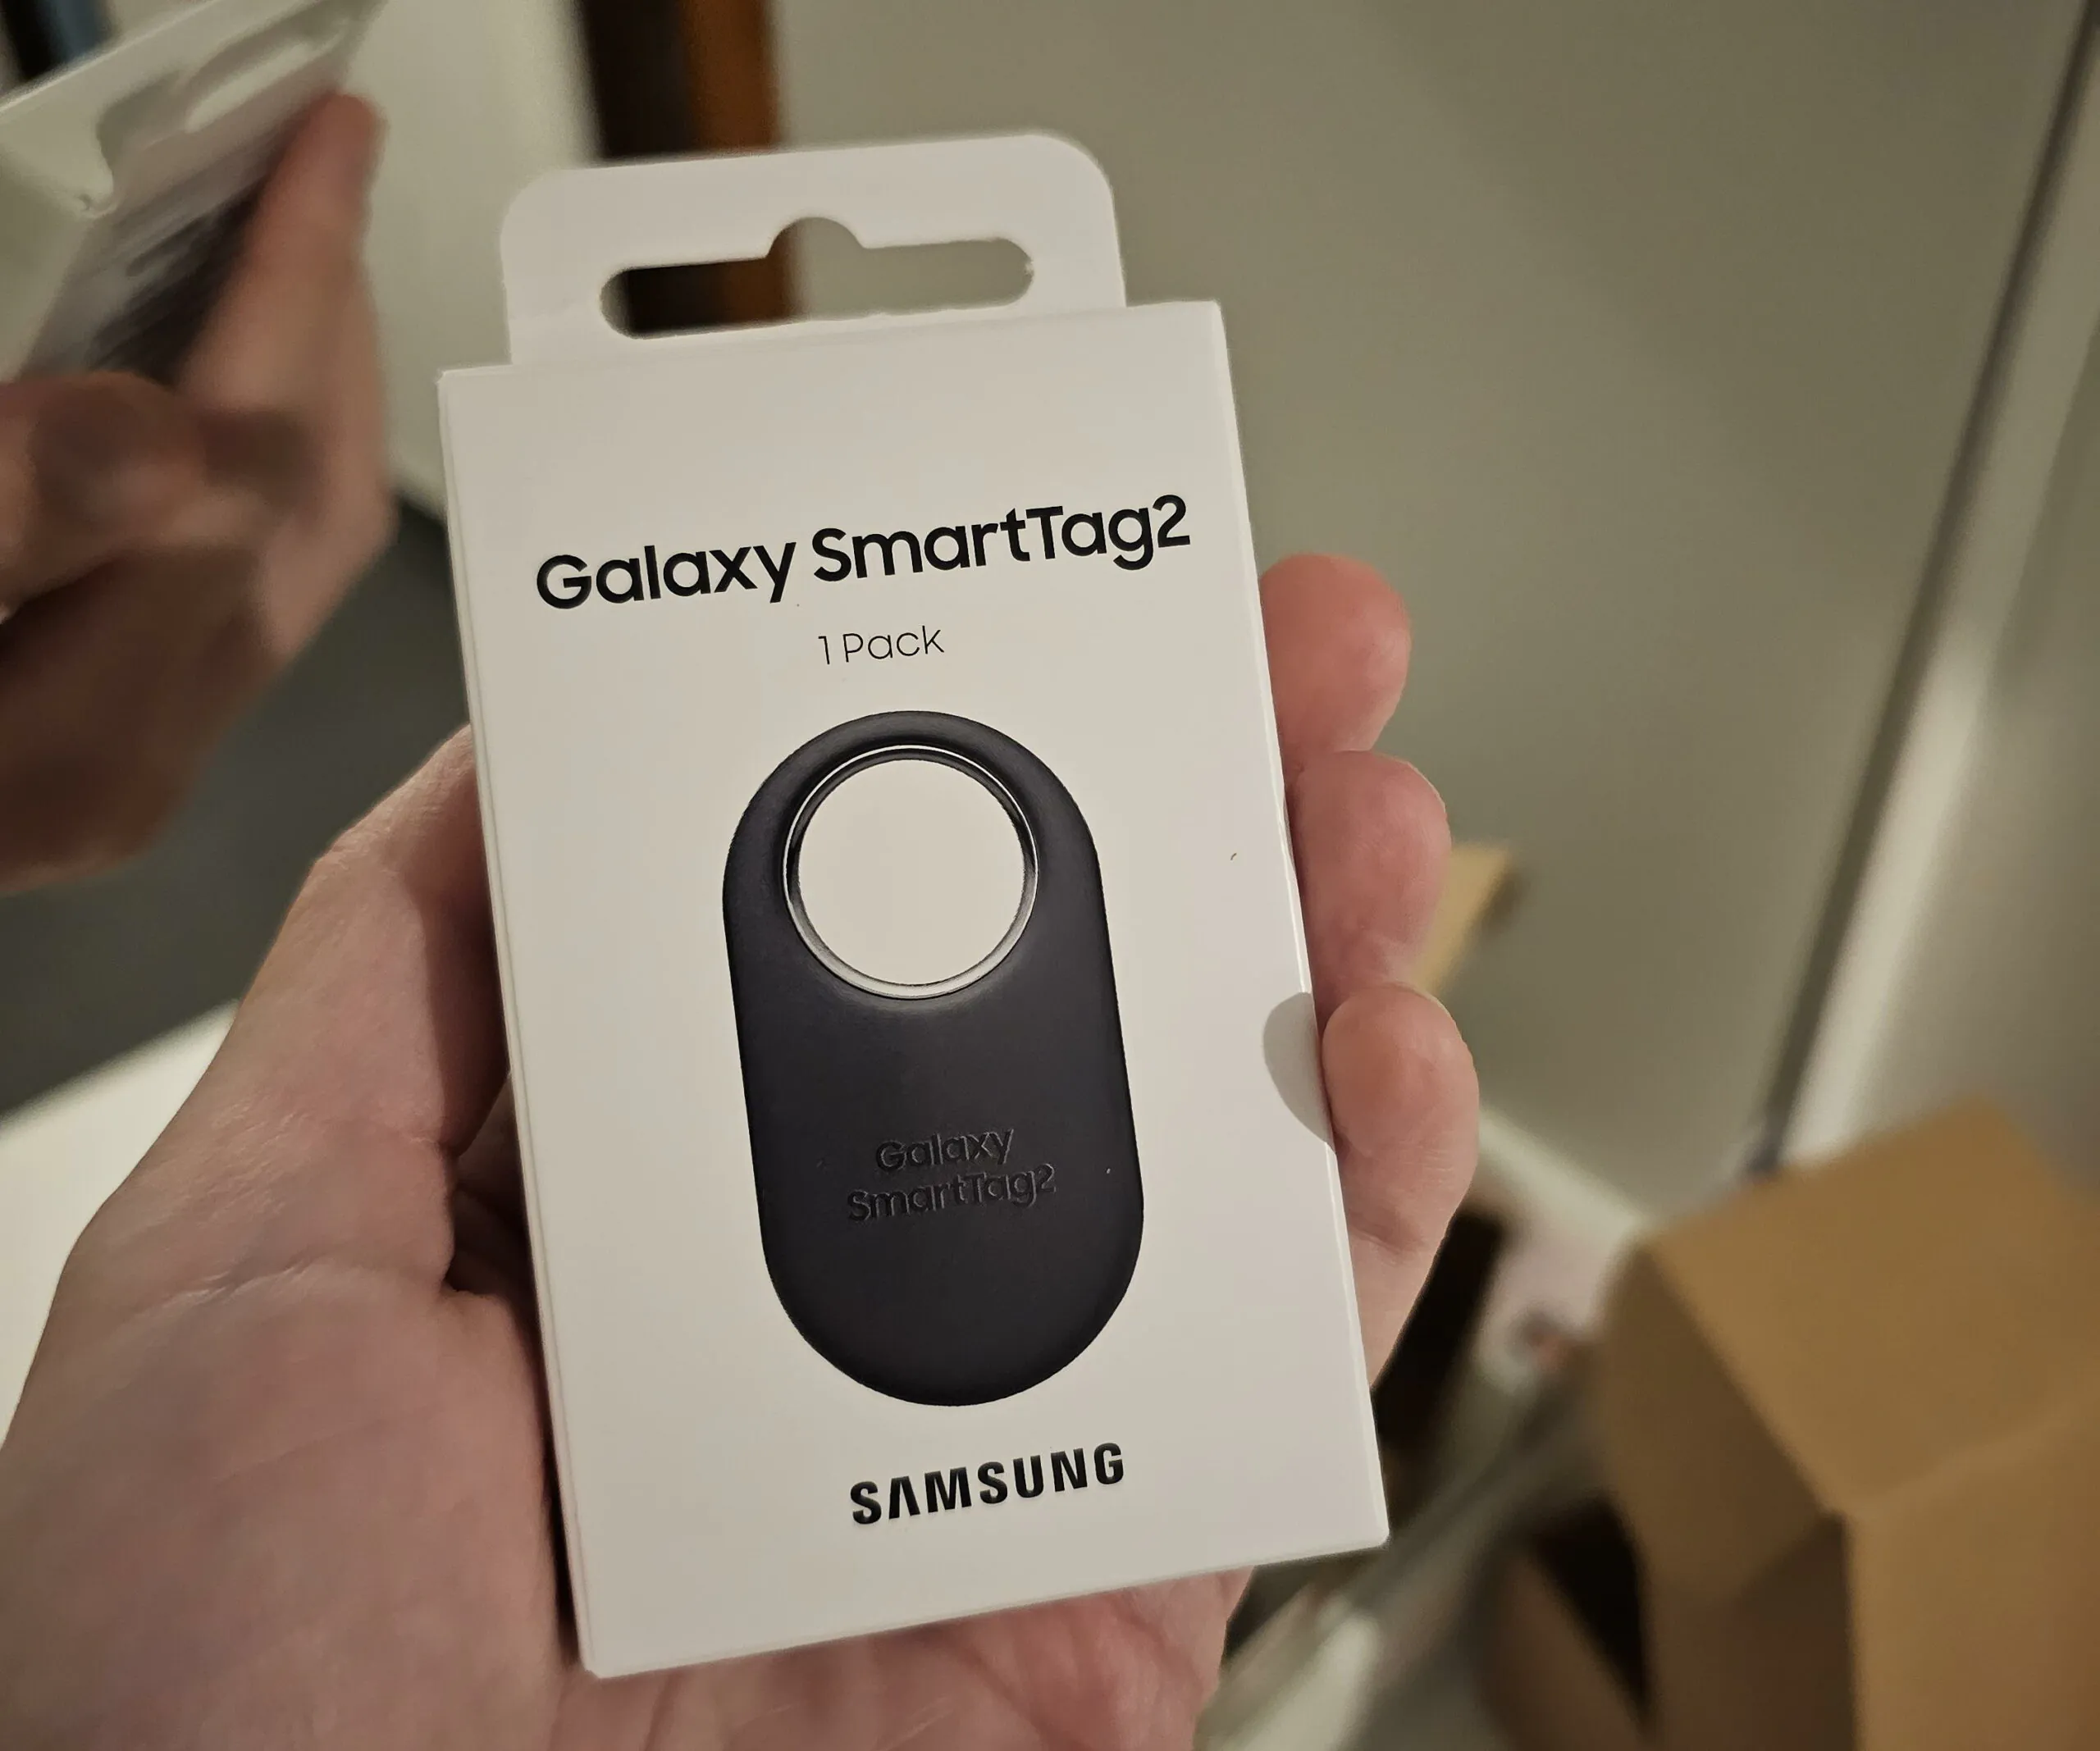  SAMSUNG Galaxy SmartTag2, Bluetooth Tracker, Smart Tag GPS  Locator Tracking Device, Item Finder for Keys, Wallet, Luggage, Pets, Use  w/Phones and Tablets Android 11 or Later, 2023, 1 Pack, Black : Electronics